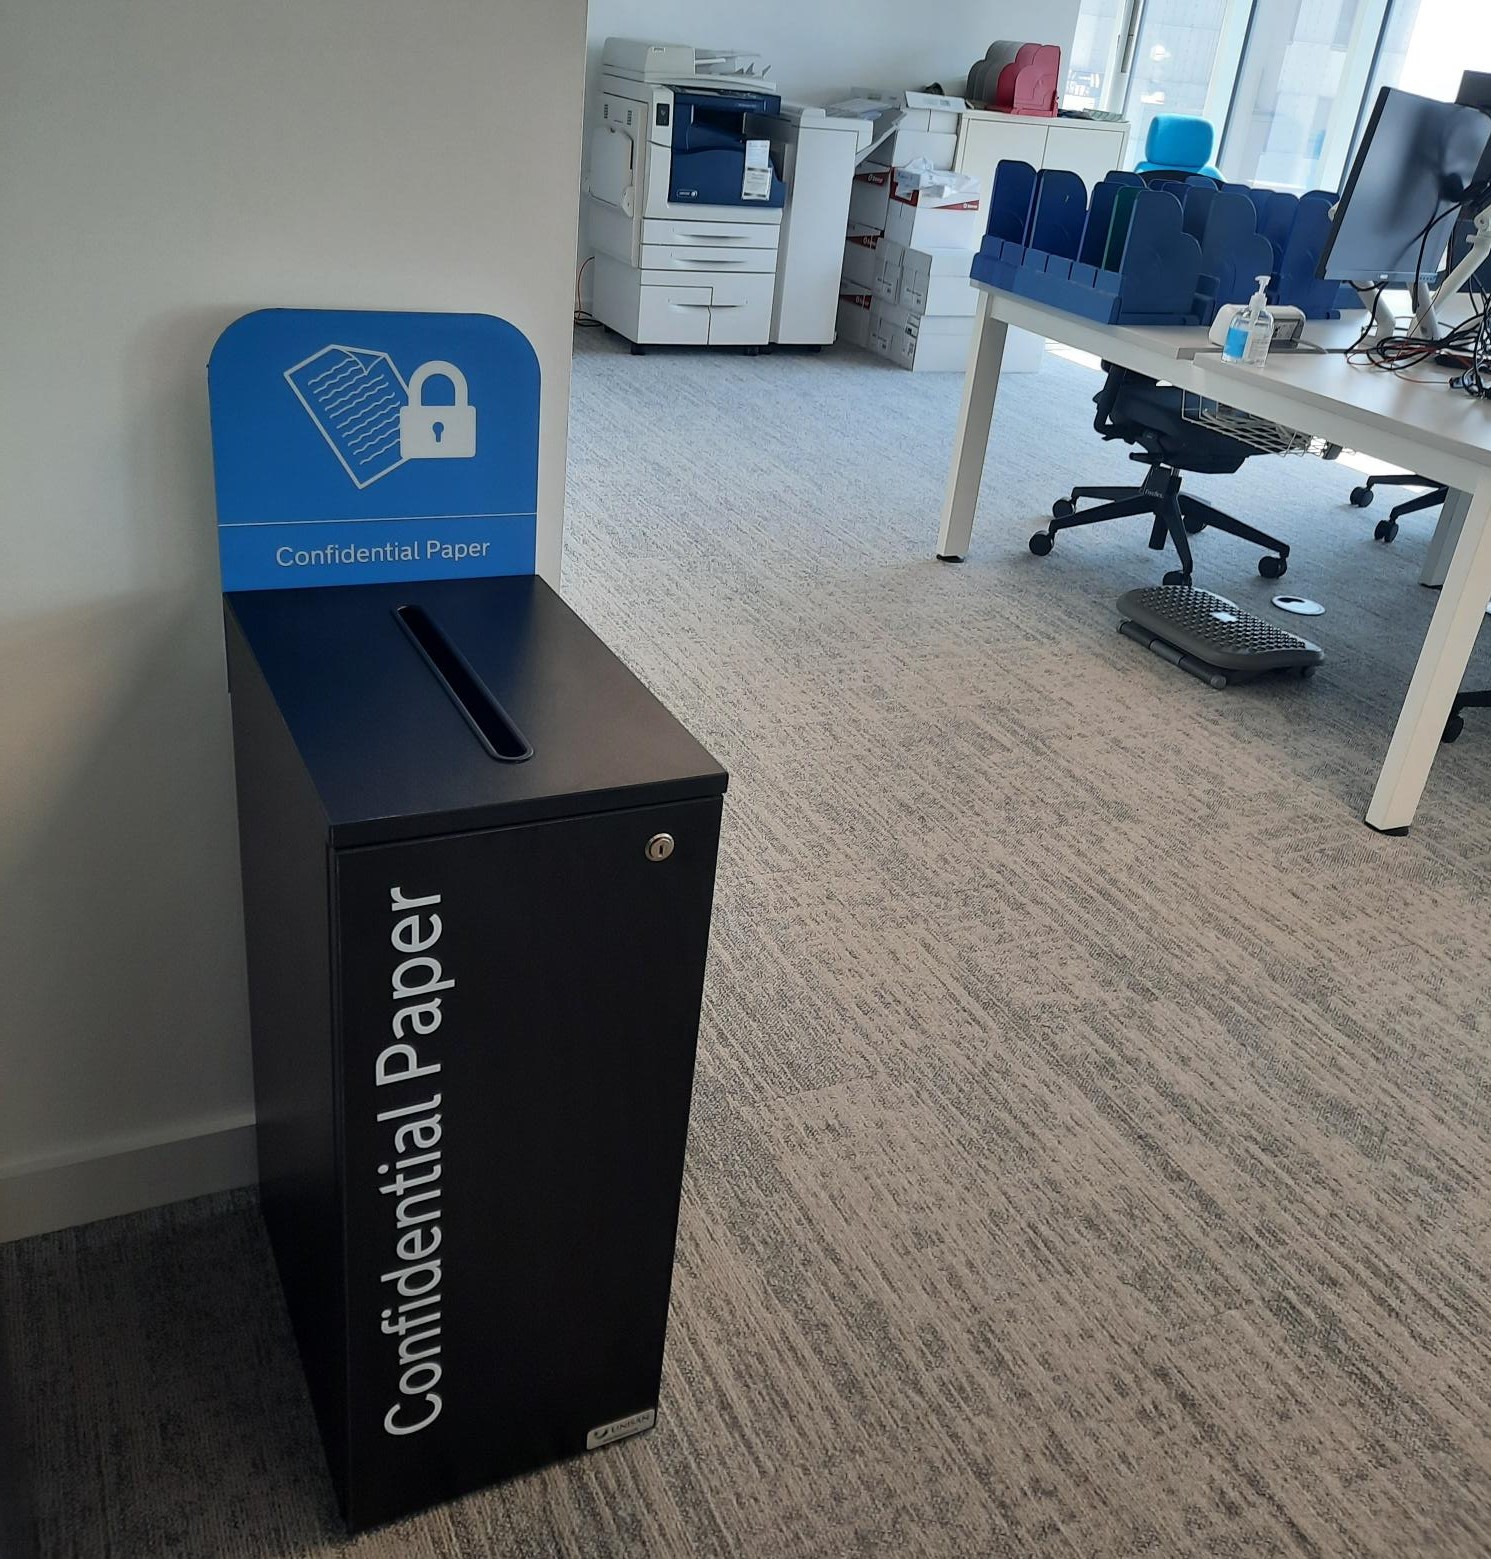 aspire lockable recycling bin for confidential office paper waste